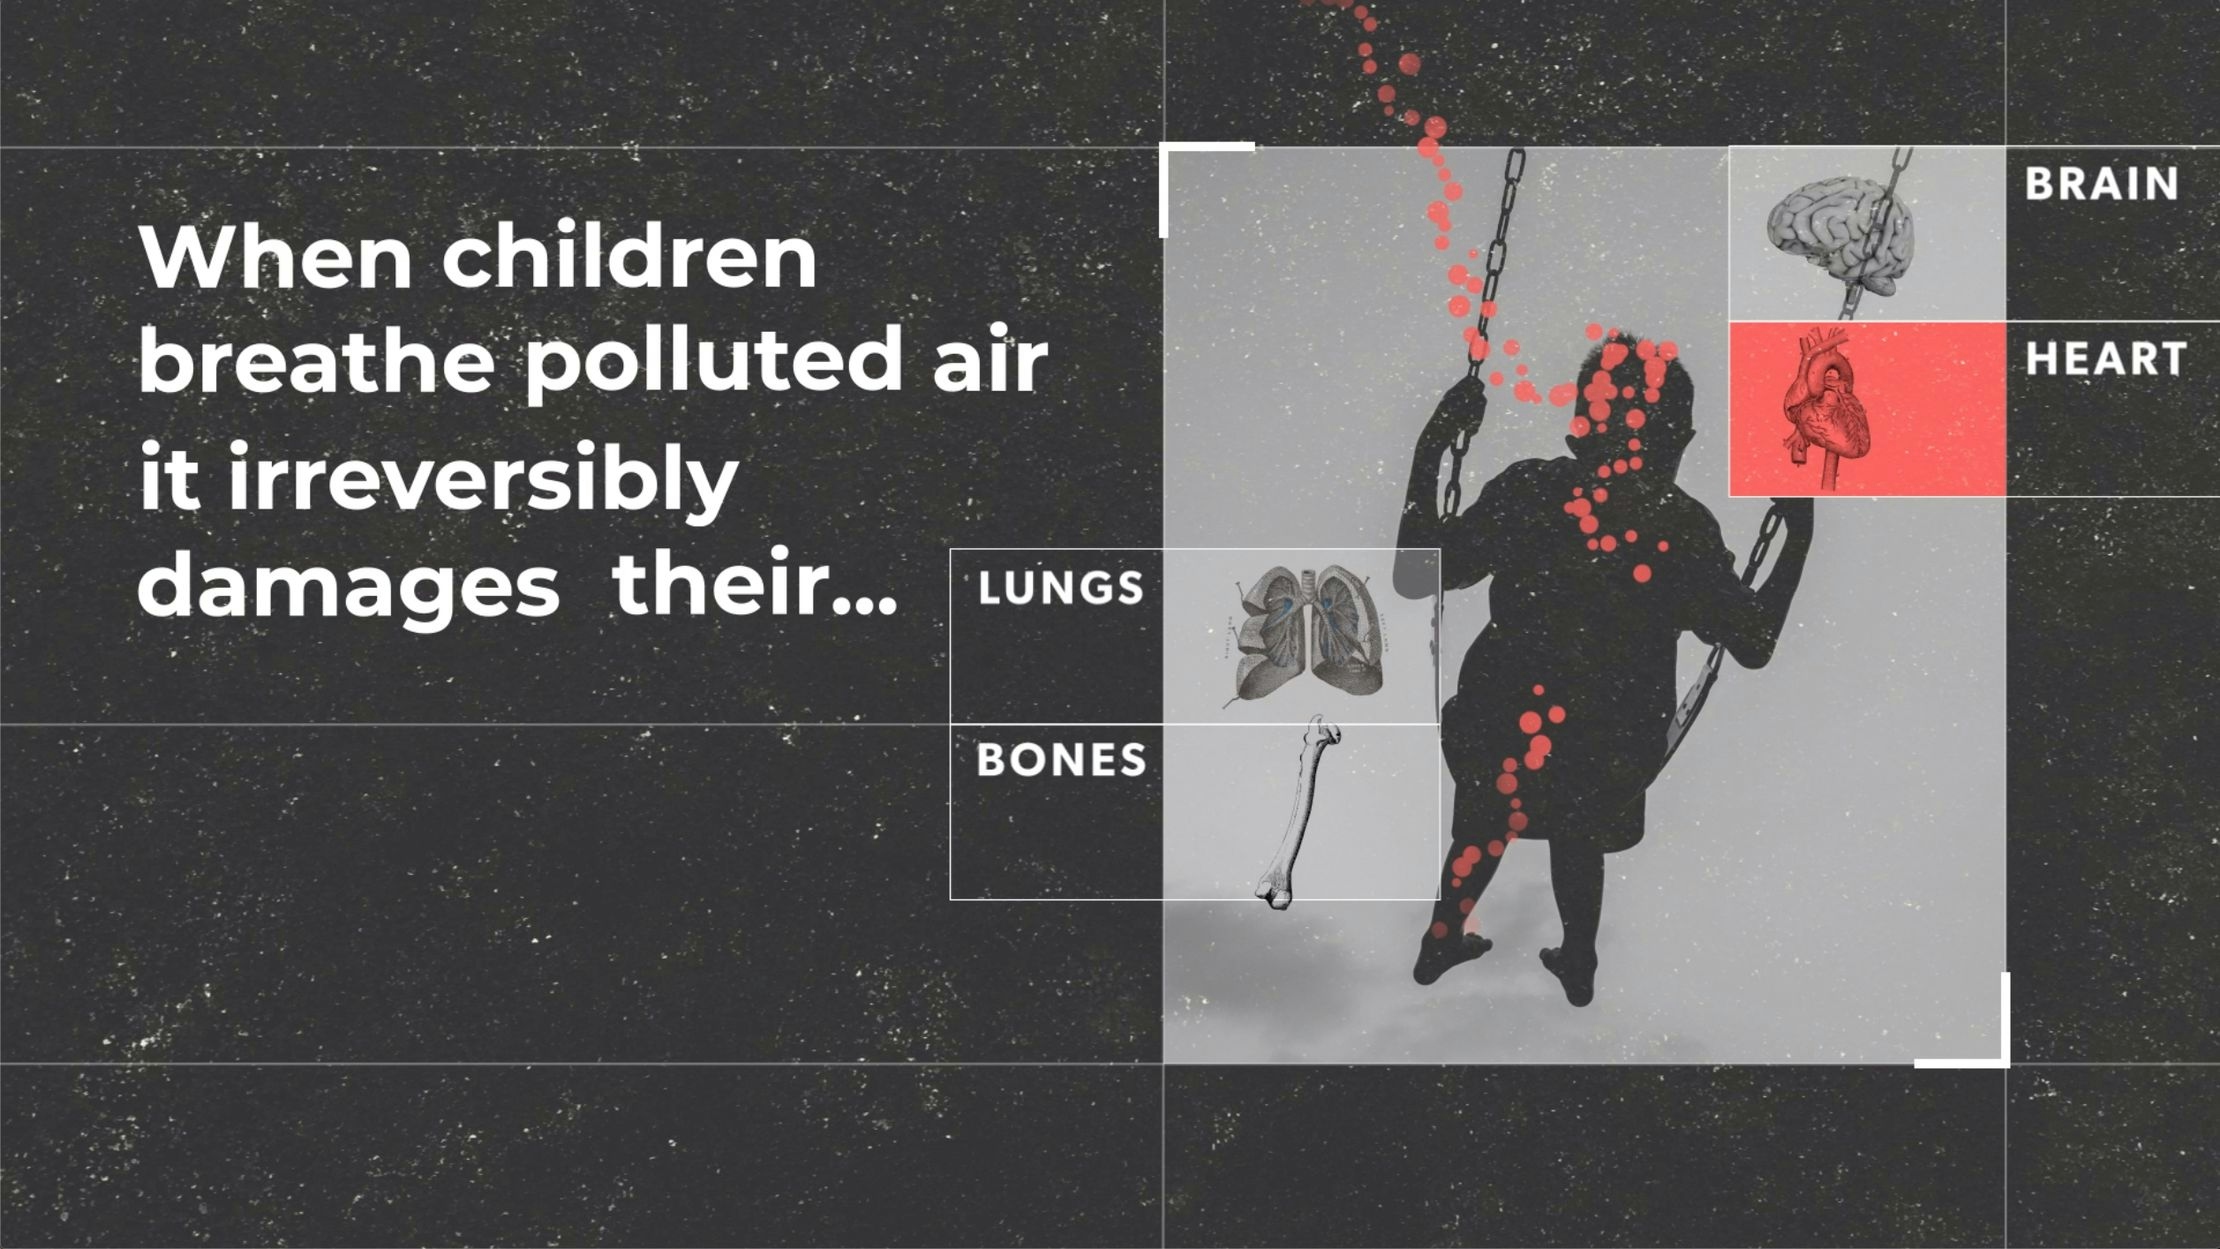 A still from the This is Ella video. It includes a graphic of a child on a swing with labels of body parts affected by air pollution including the brain, heart, lungs and bones. There is text that reads: 'When children breathe polluted air it rreversibly damages their...'. Heart is highlighted in red, completing the sentence. 